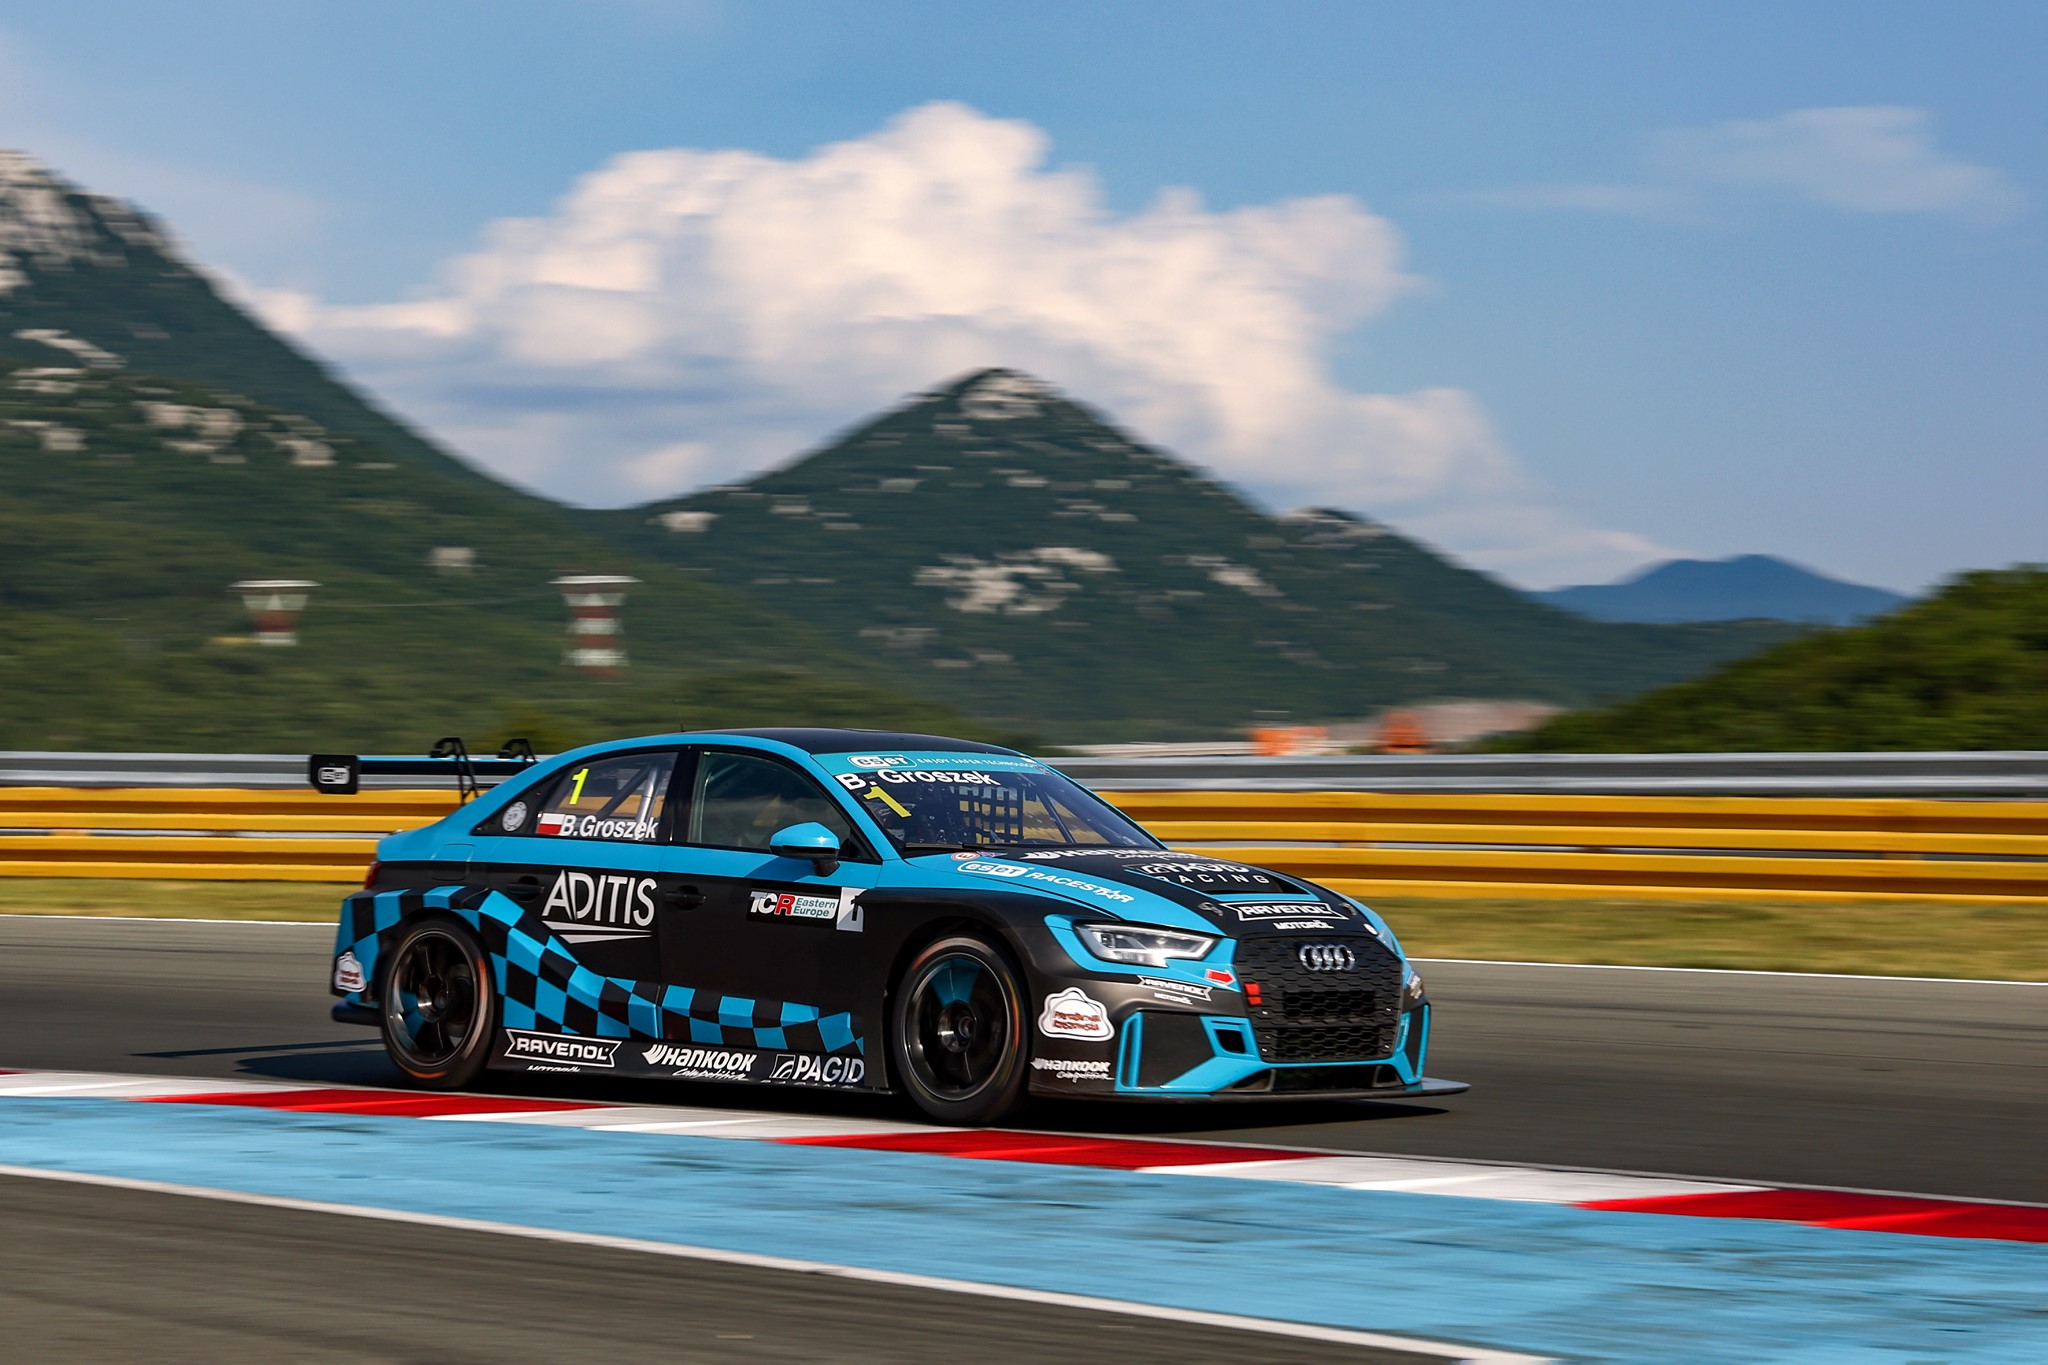 The ESET RaceStar project will support three drivers at Hungaroring